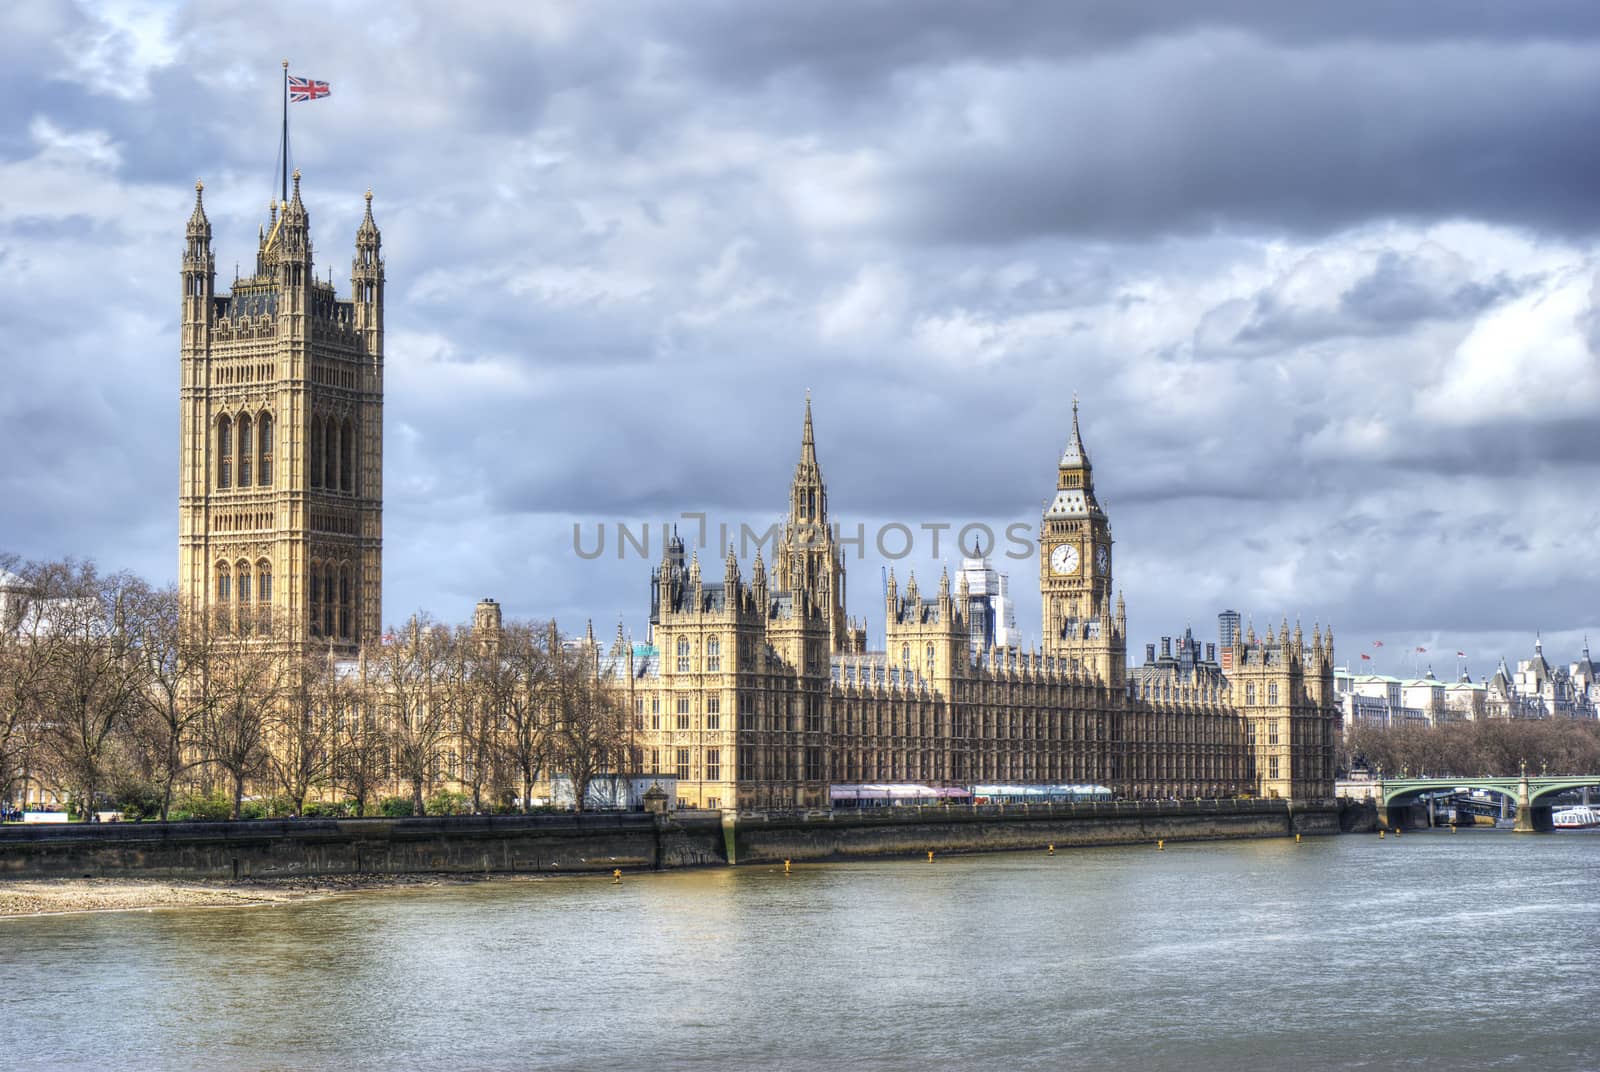 London. Beautiful view of government Houses of Parliament and big ben with Thames river